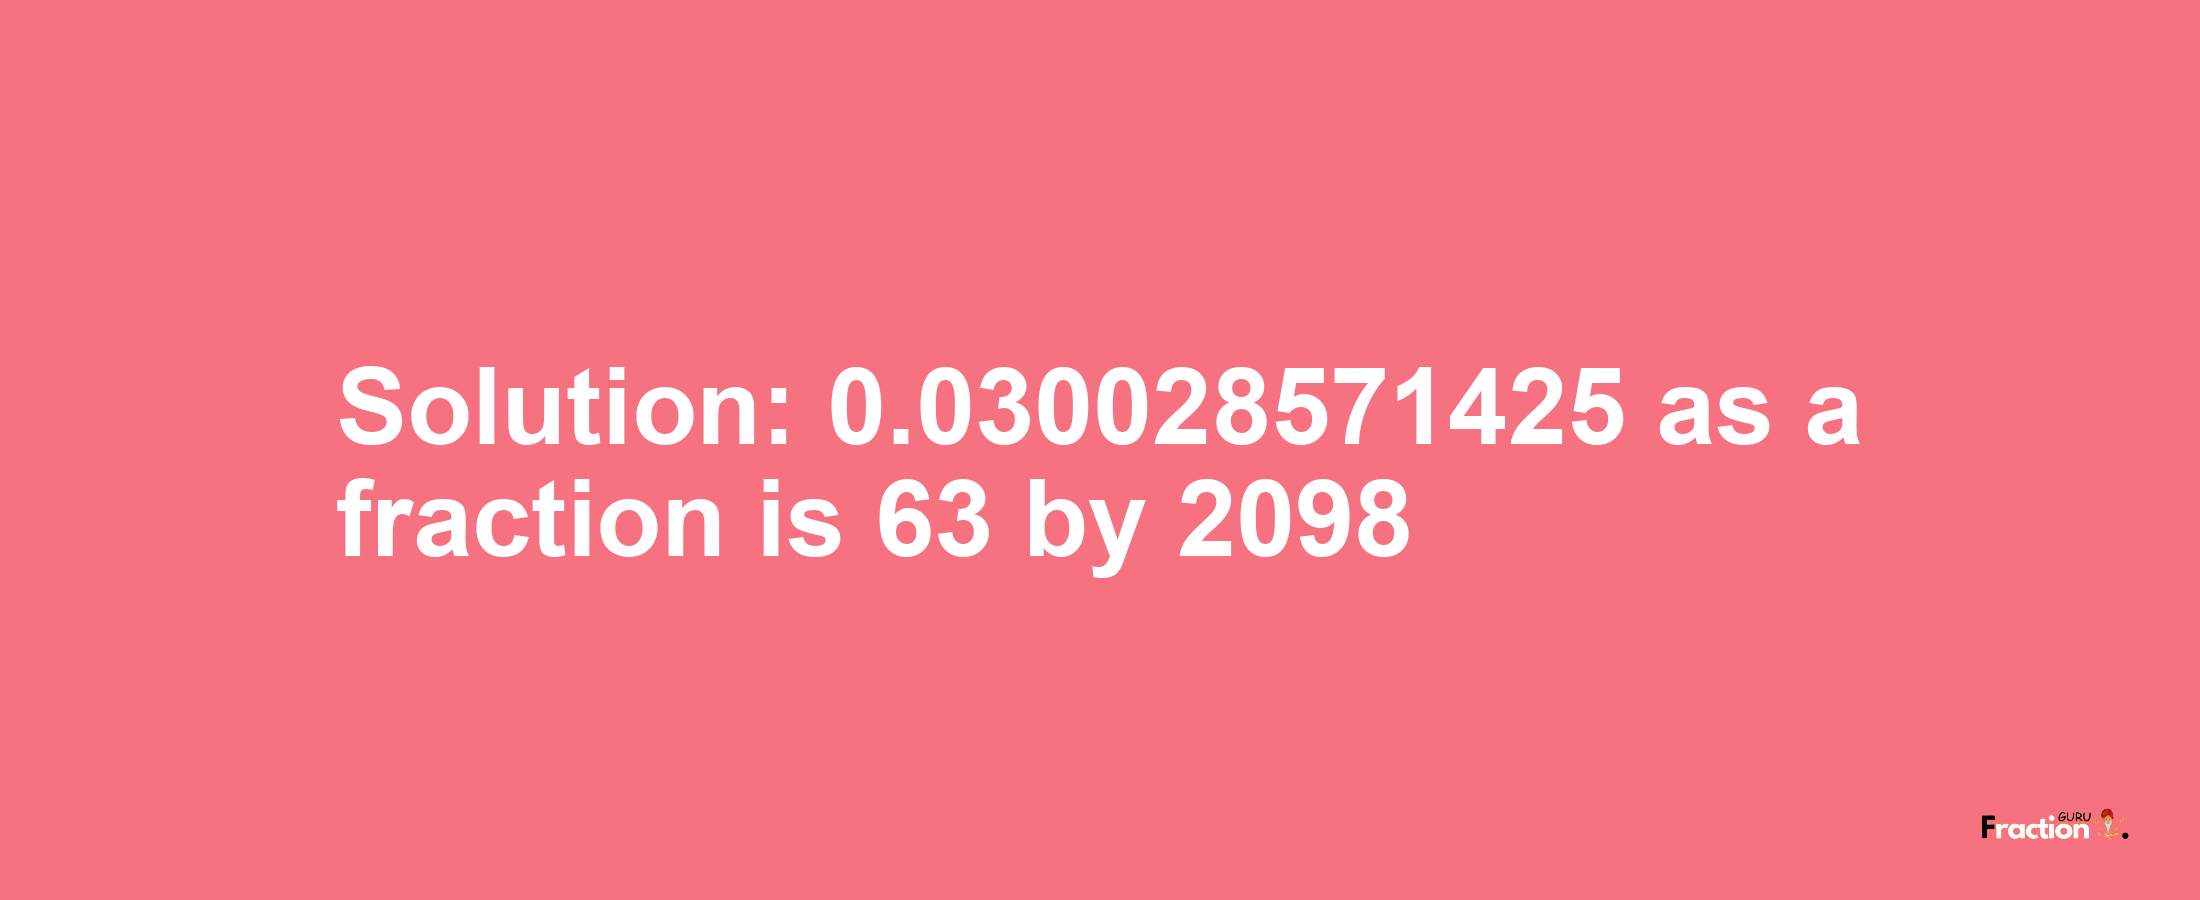 Solution:0.030028571425 as a fraction is 63/2098